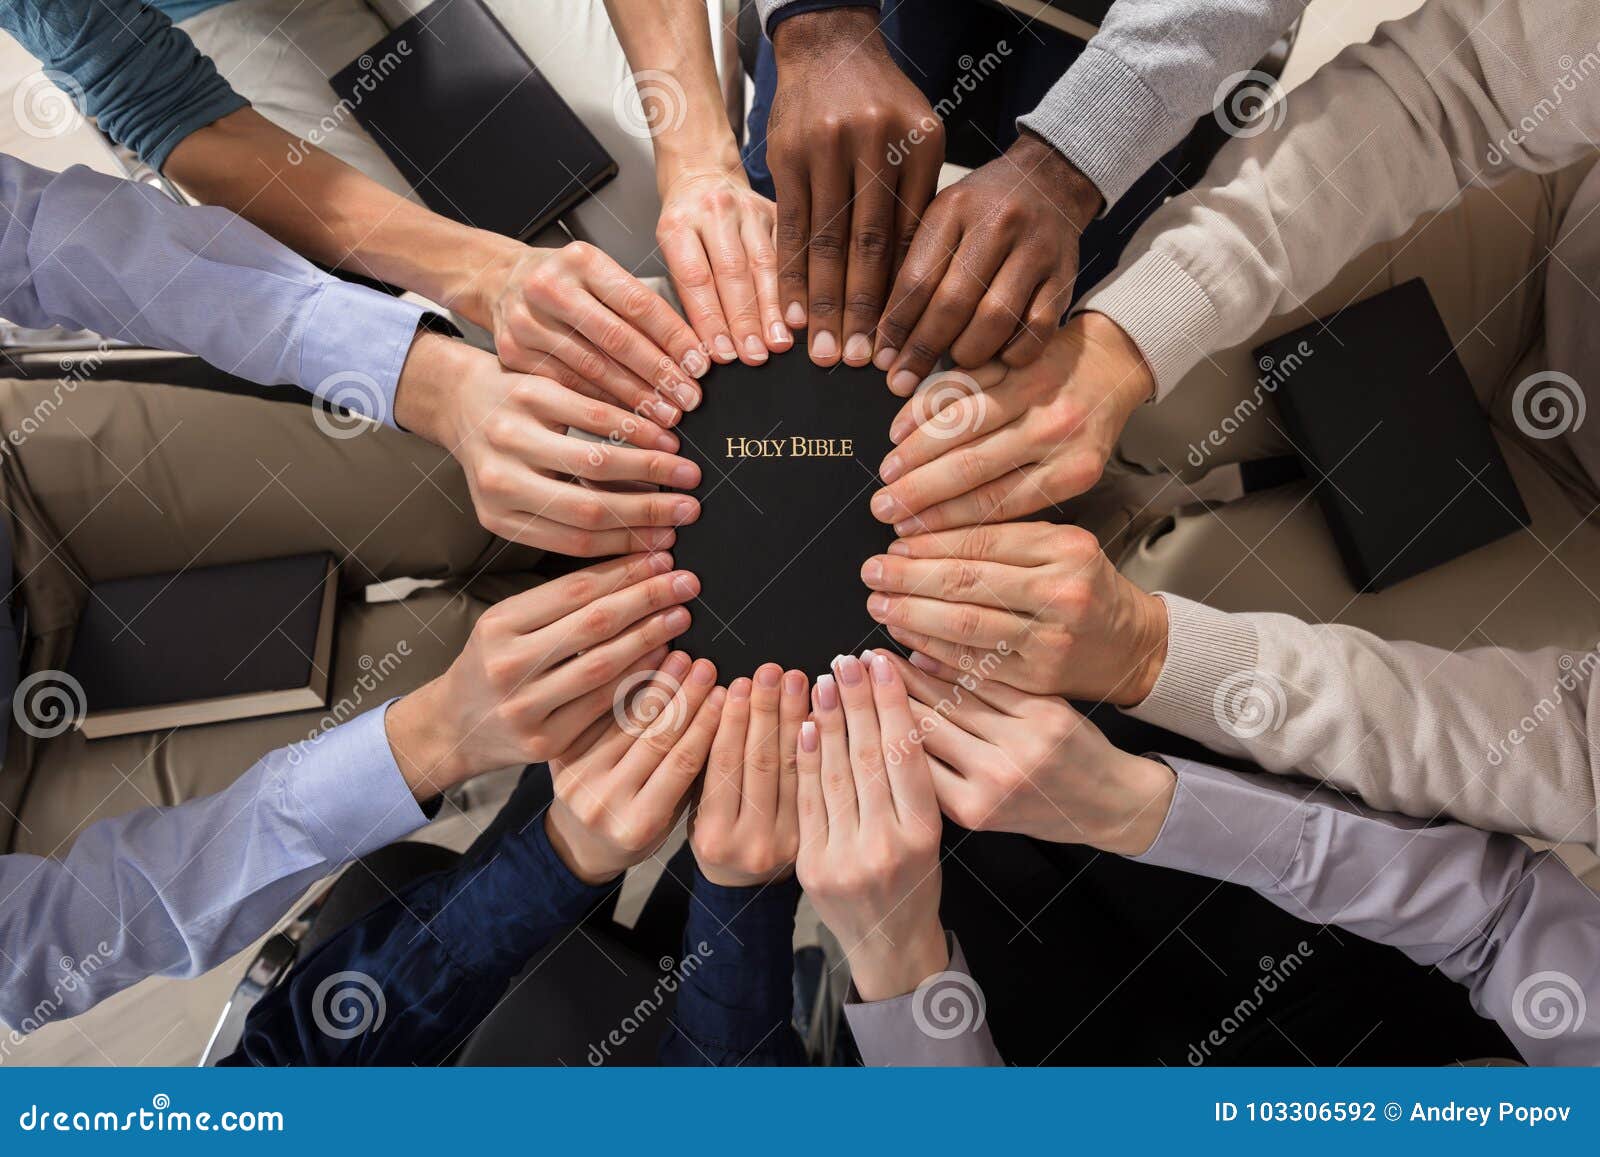 hands holding holy bible